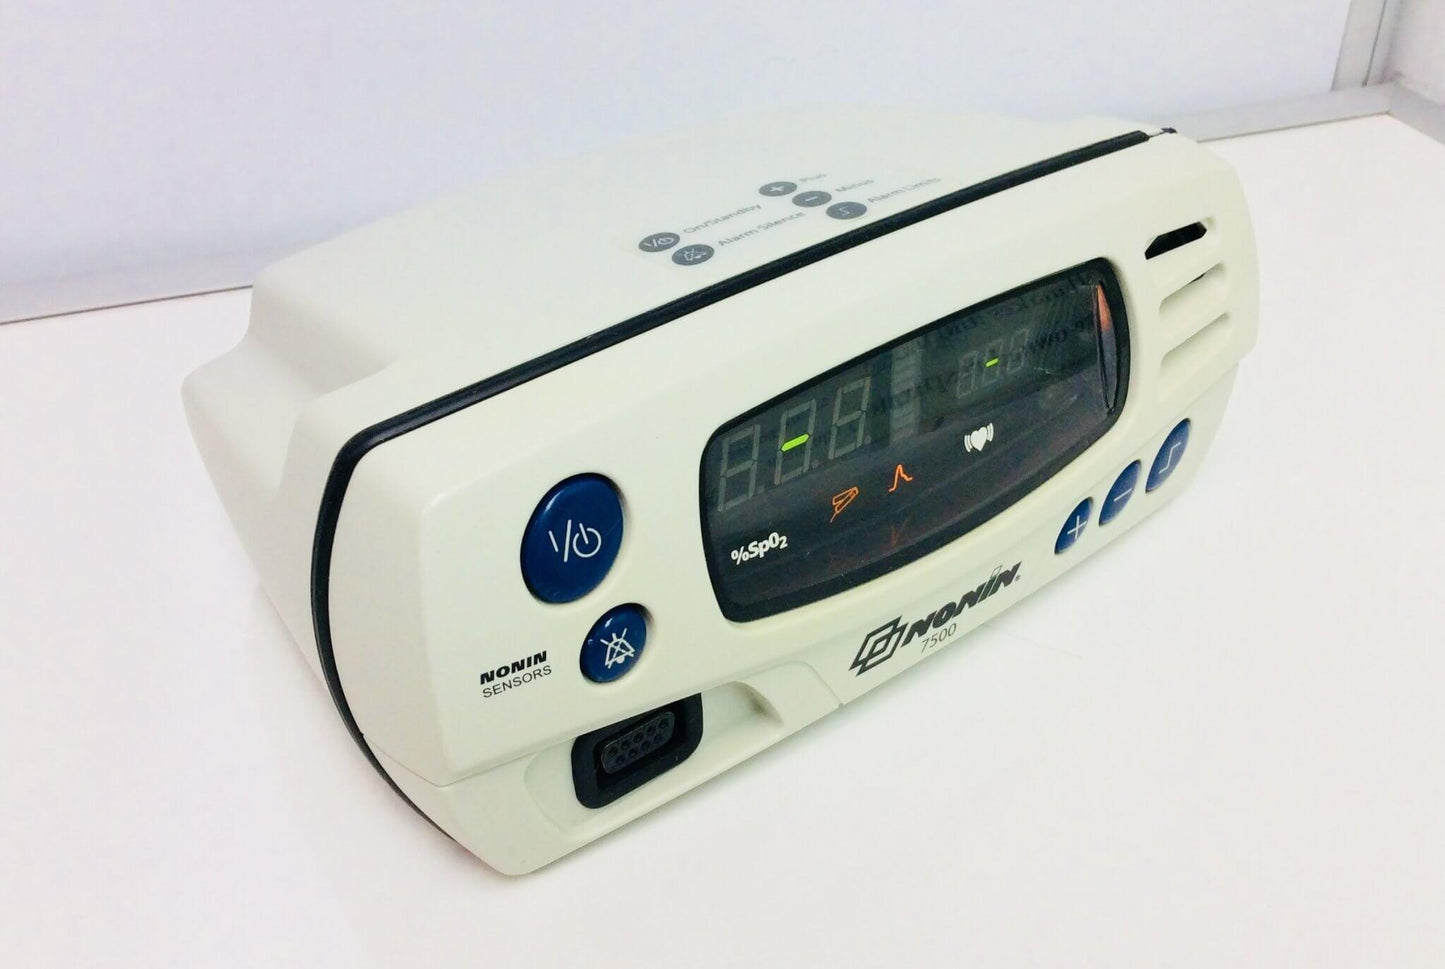 USED Nonin 7500 Pluse Oximeter IPX2 with Accessories Warranty FREE Shipping - MBR Medicals